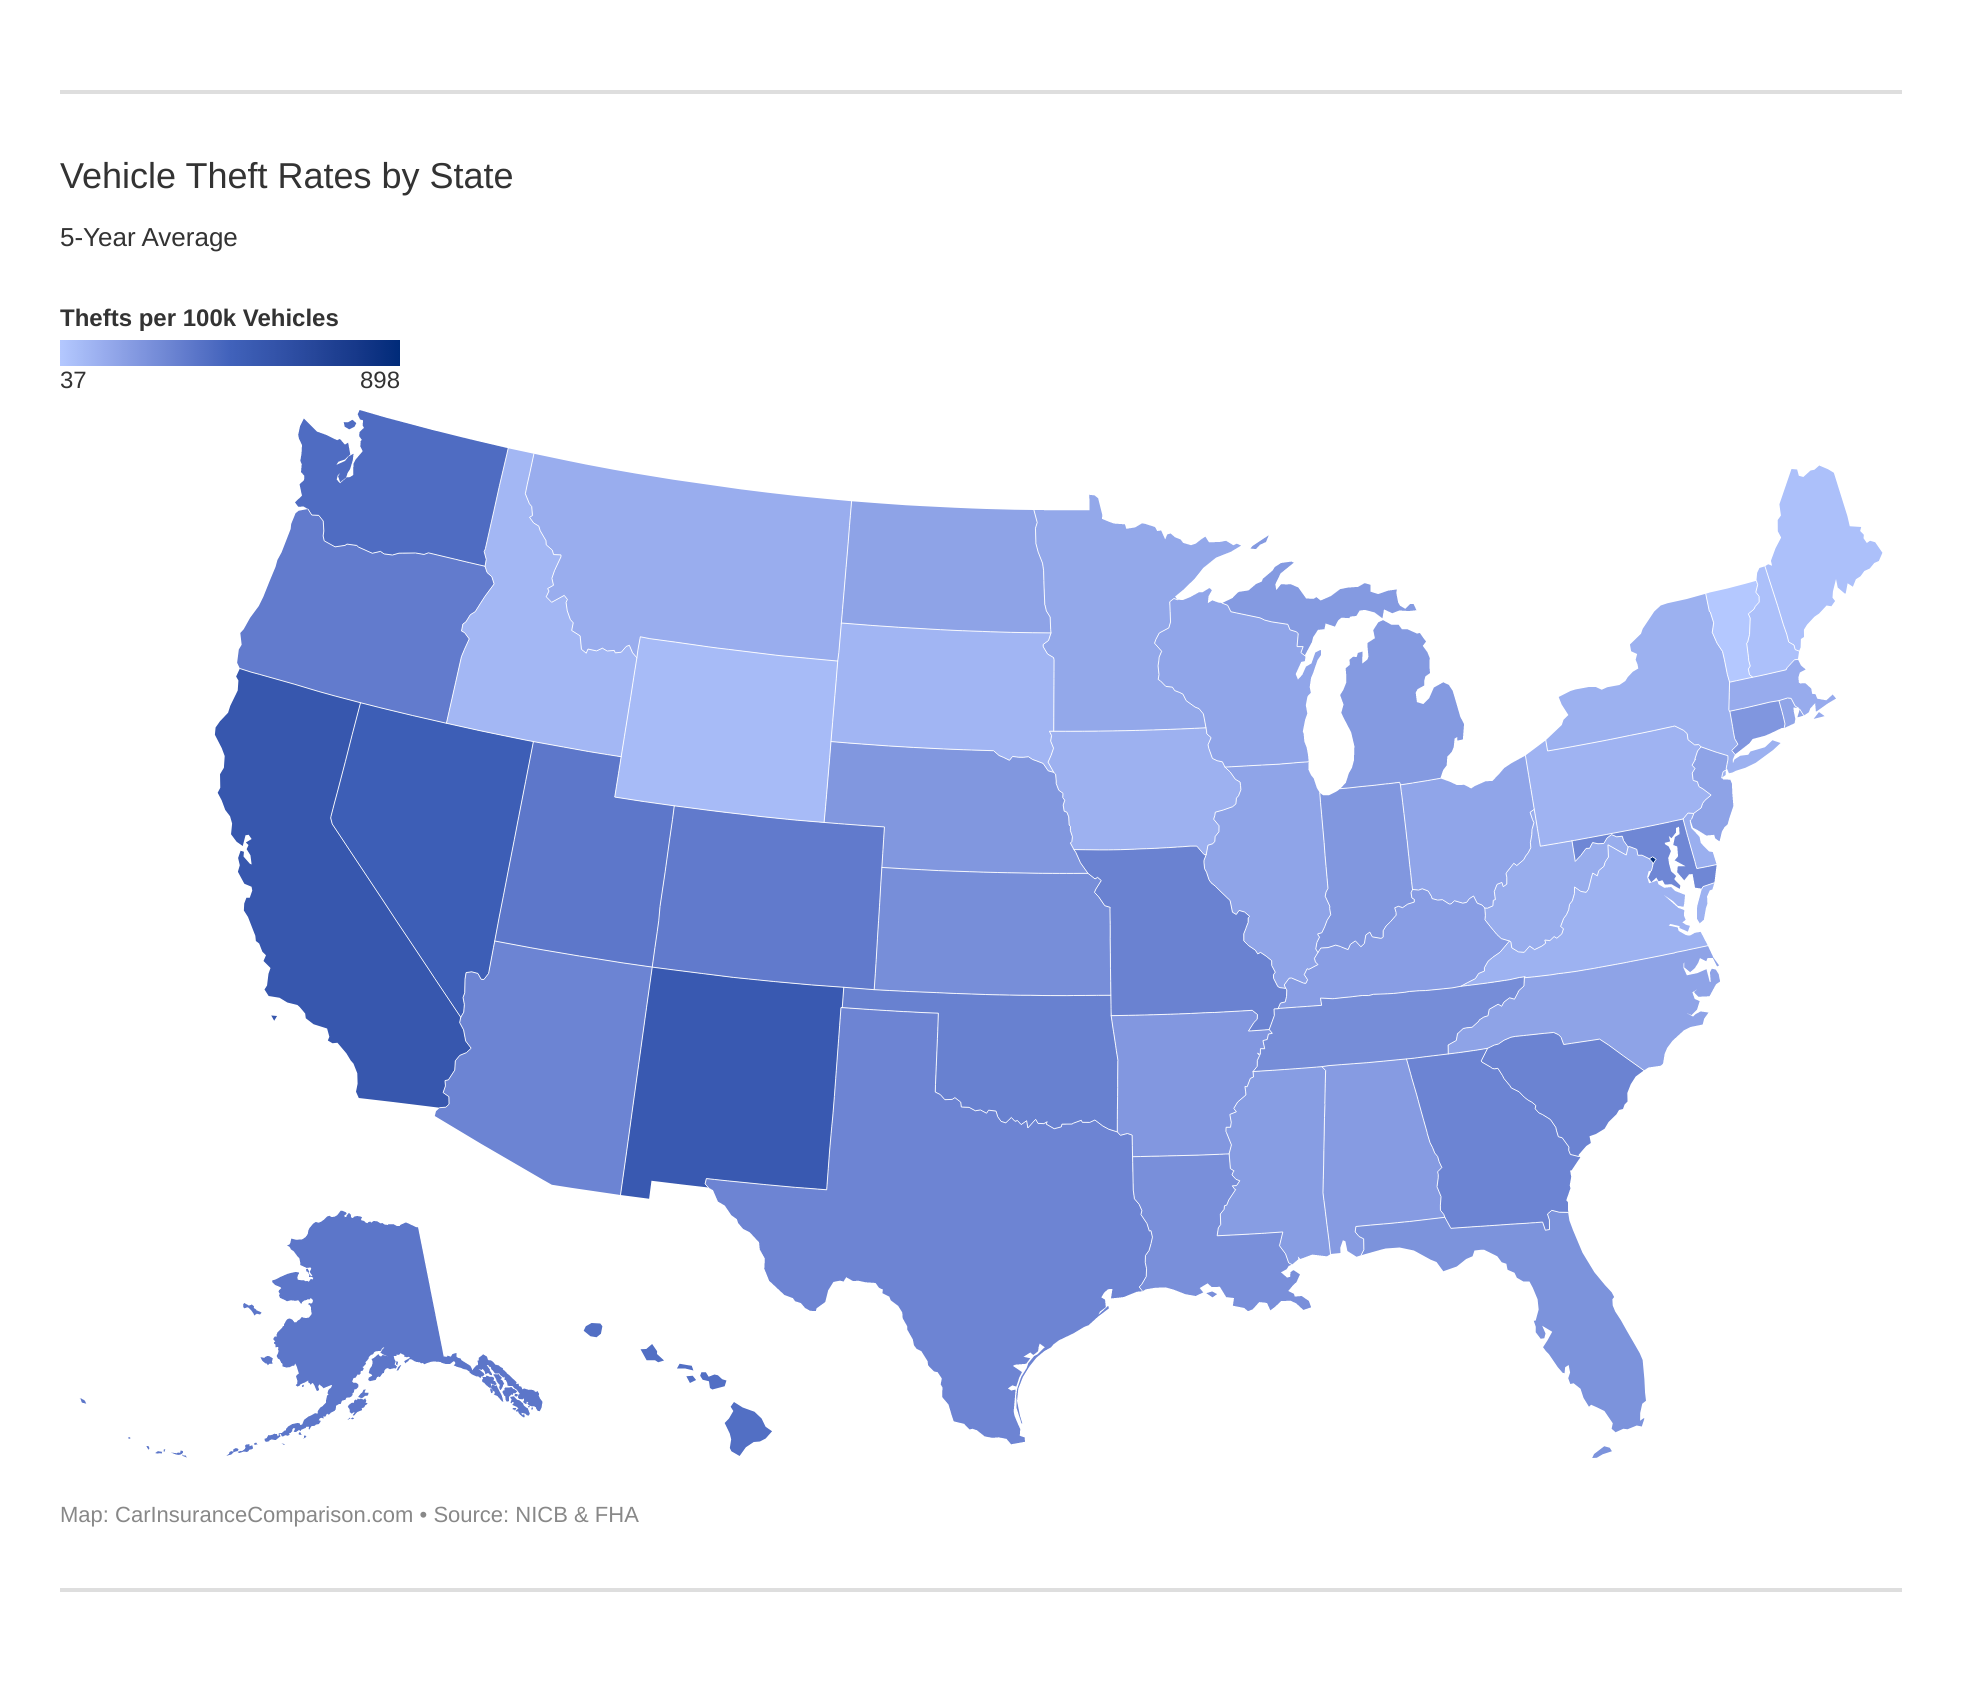 Vehicle Theft Rates by State